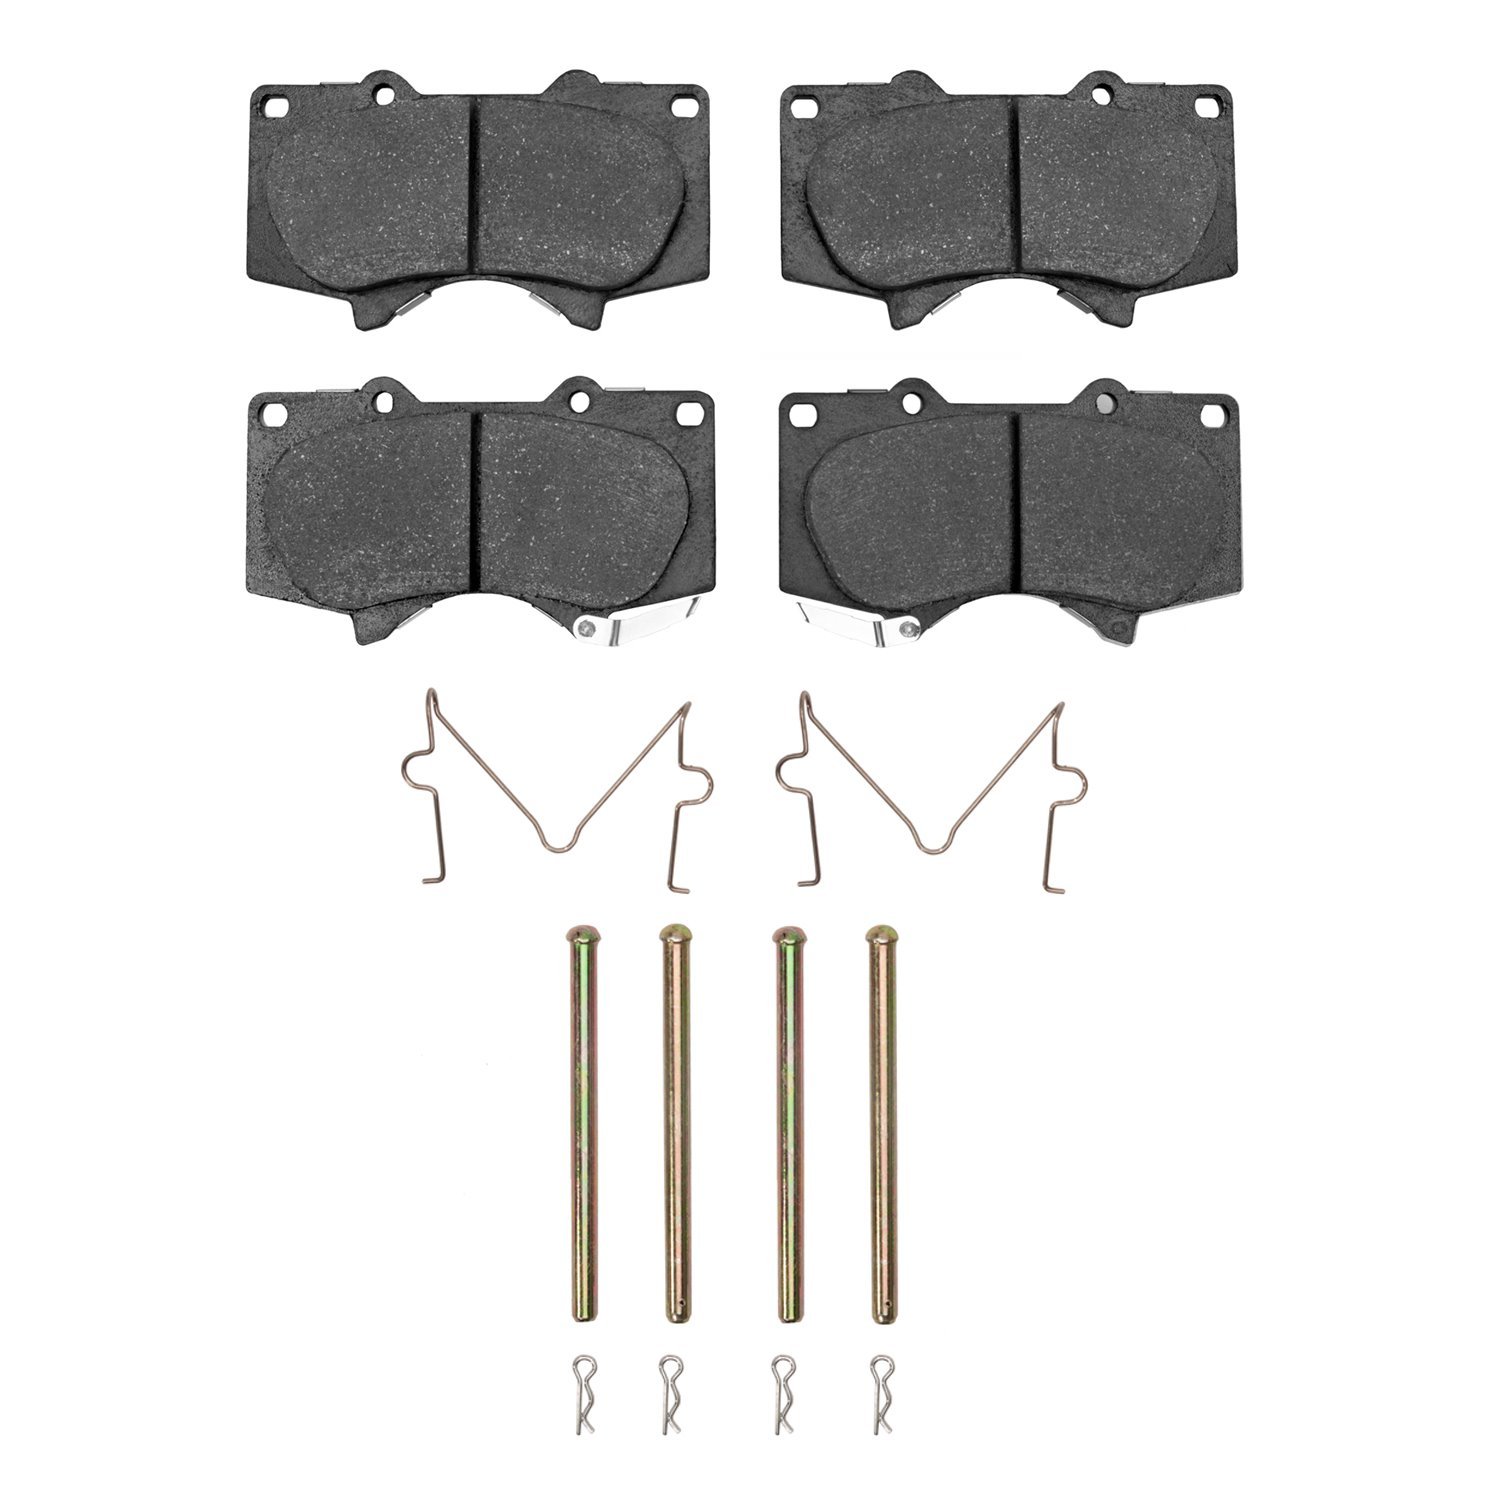 1214-0976-01 Heavy-Duty Brake Pads & Hardware Kit, Fits Select Multiple Makes/Models, Position: Front